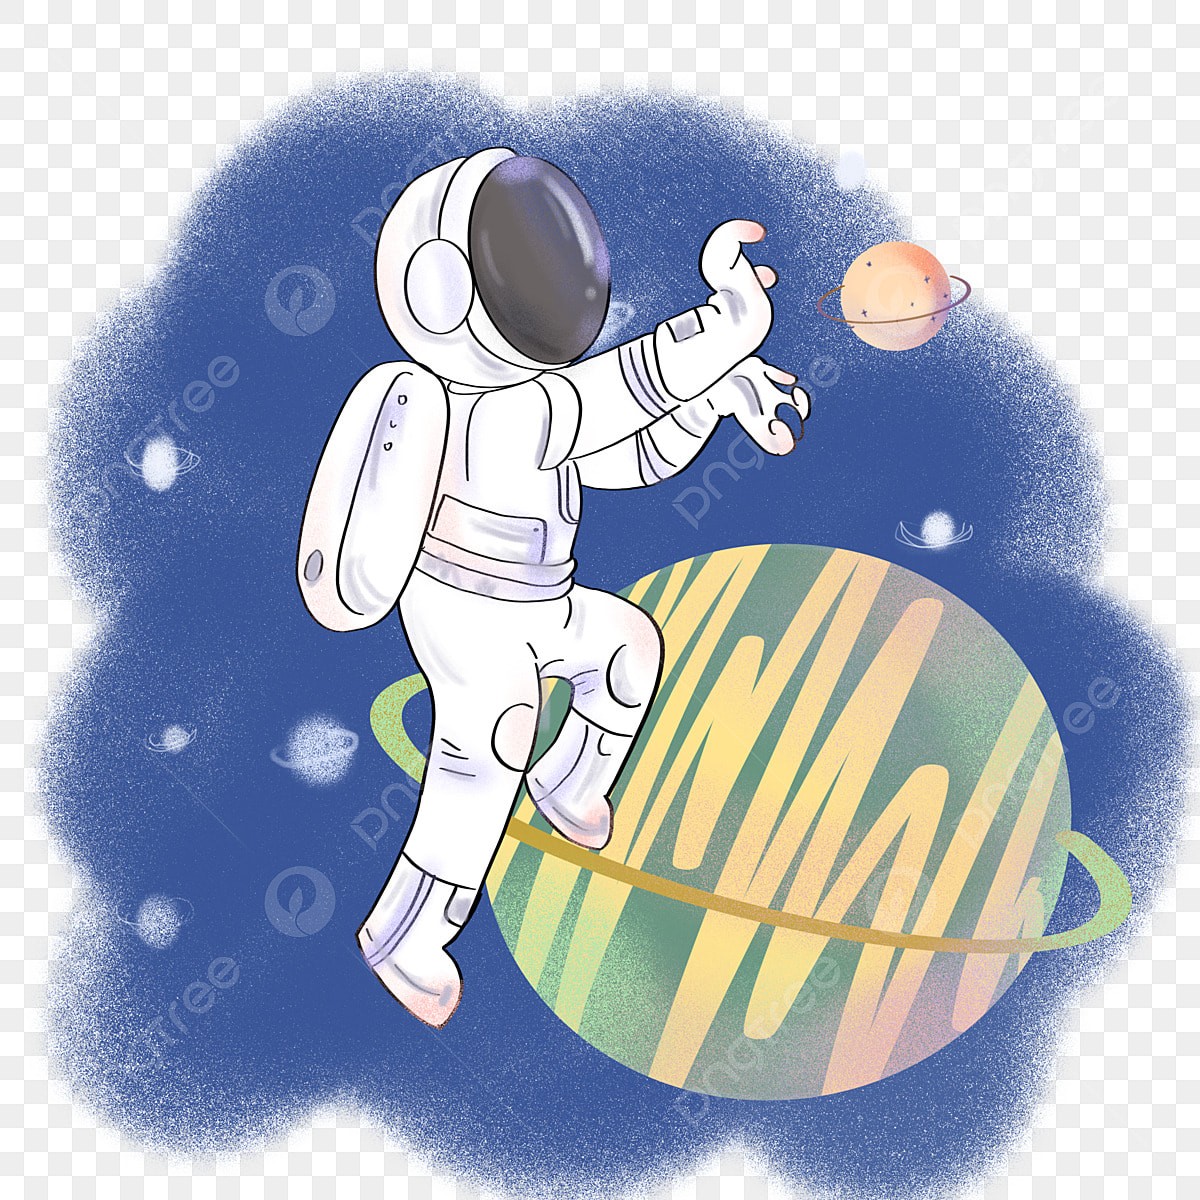 pngtree-astronaut-space-floating-cartoon-element-png-image_4481235.jpg